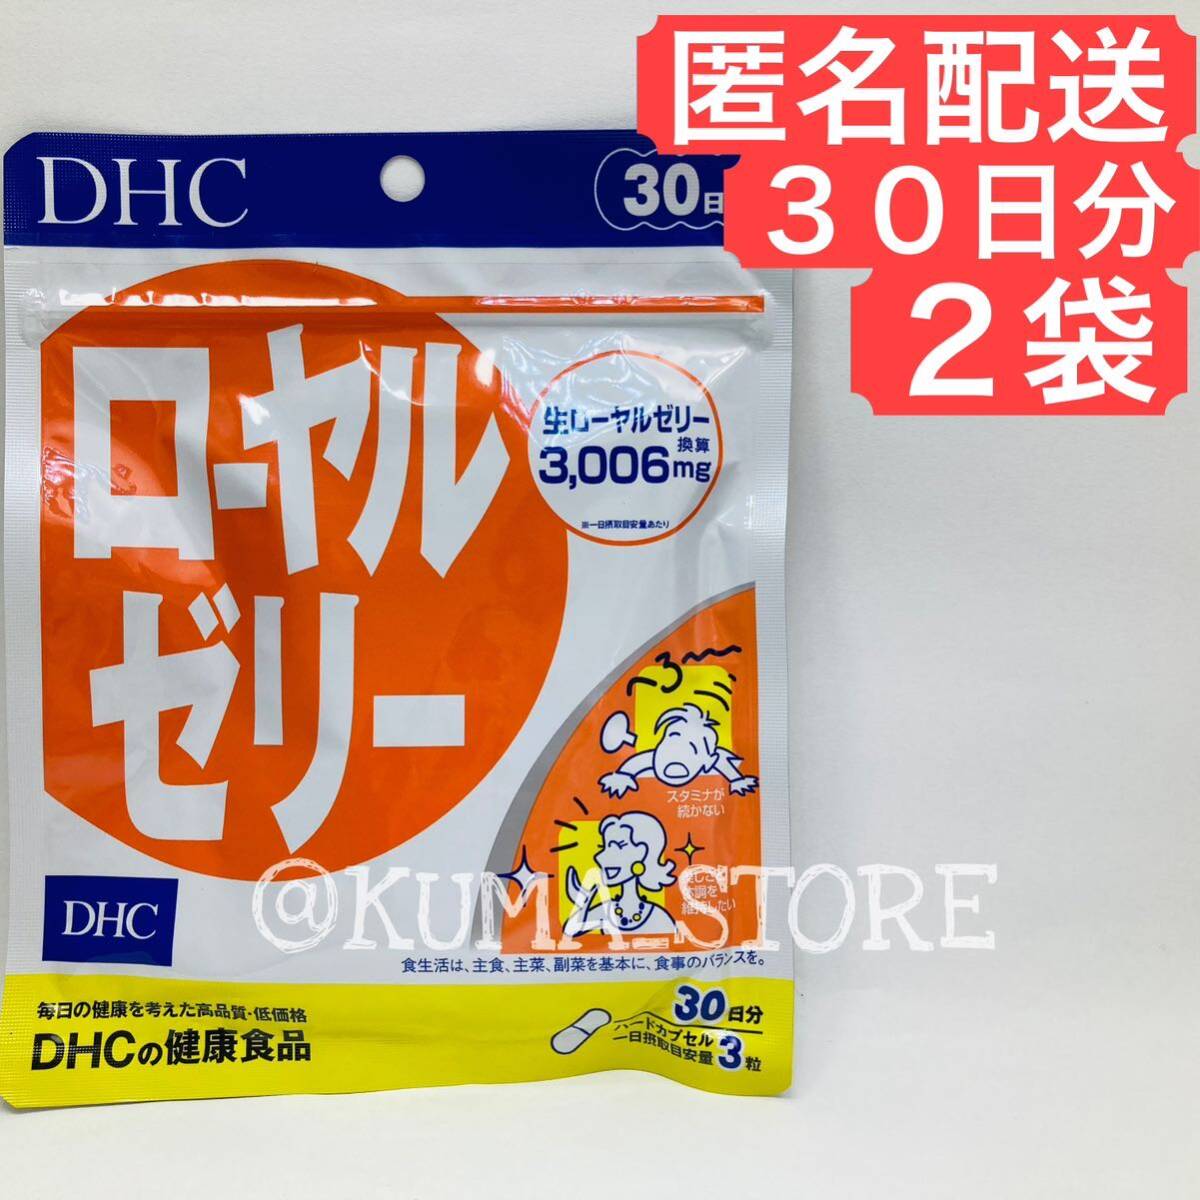 [2 sack ]DHC royal jelly 30 day minute supplement health food 